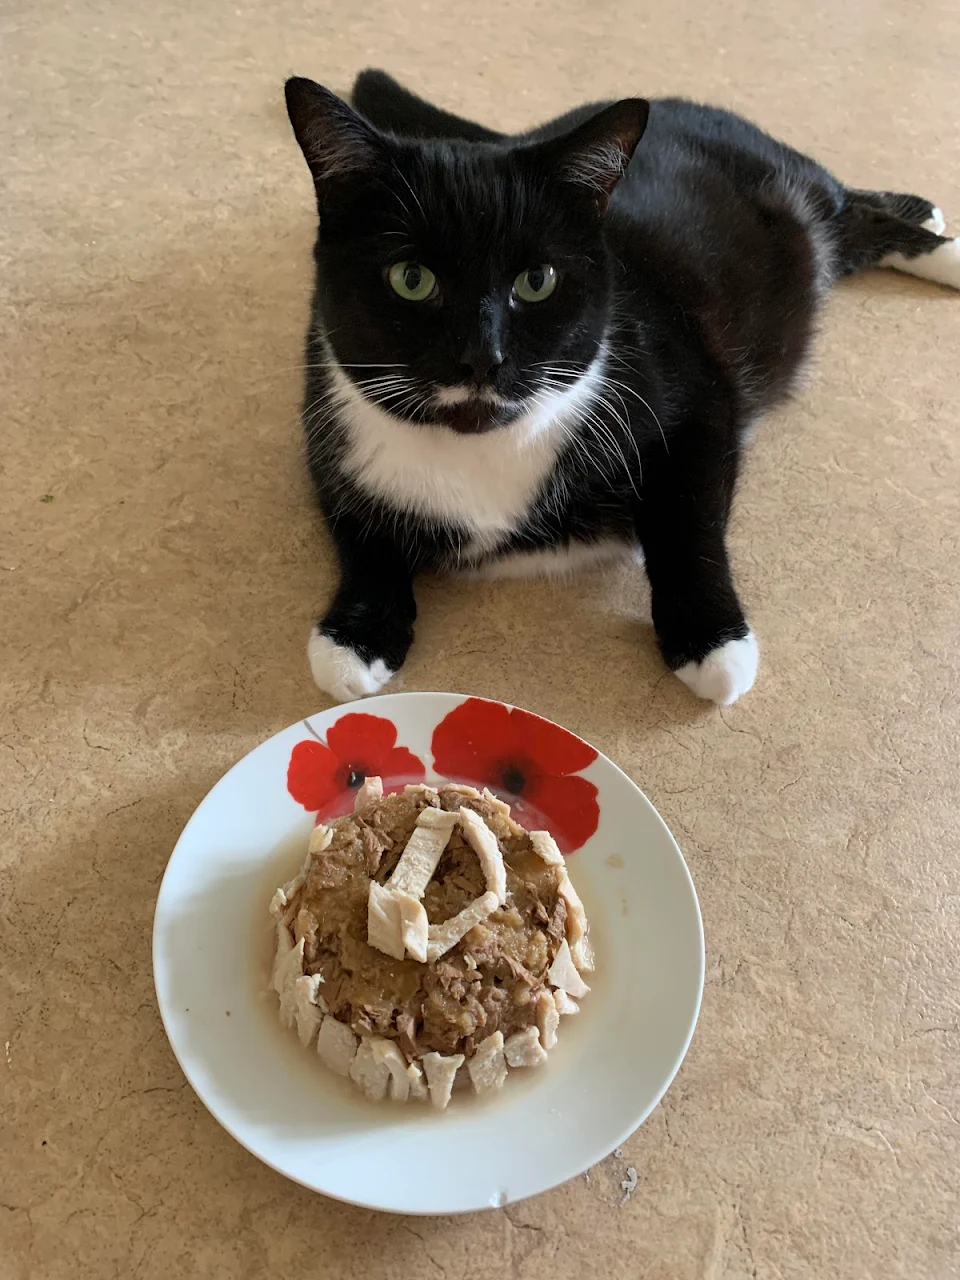 The chonk with his homemade tuna and chicken birthday “cake”. (Skipped his usual meal to eat this instead)